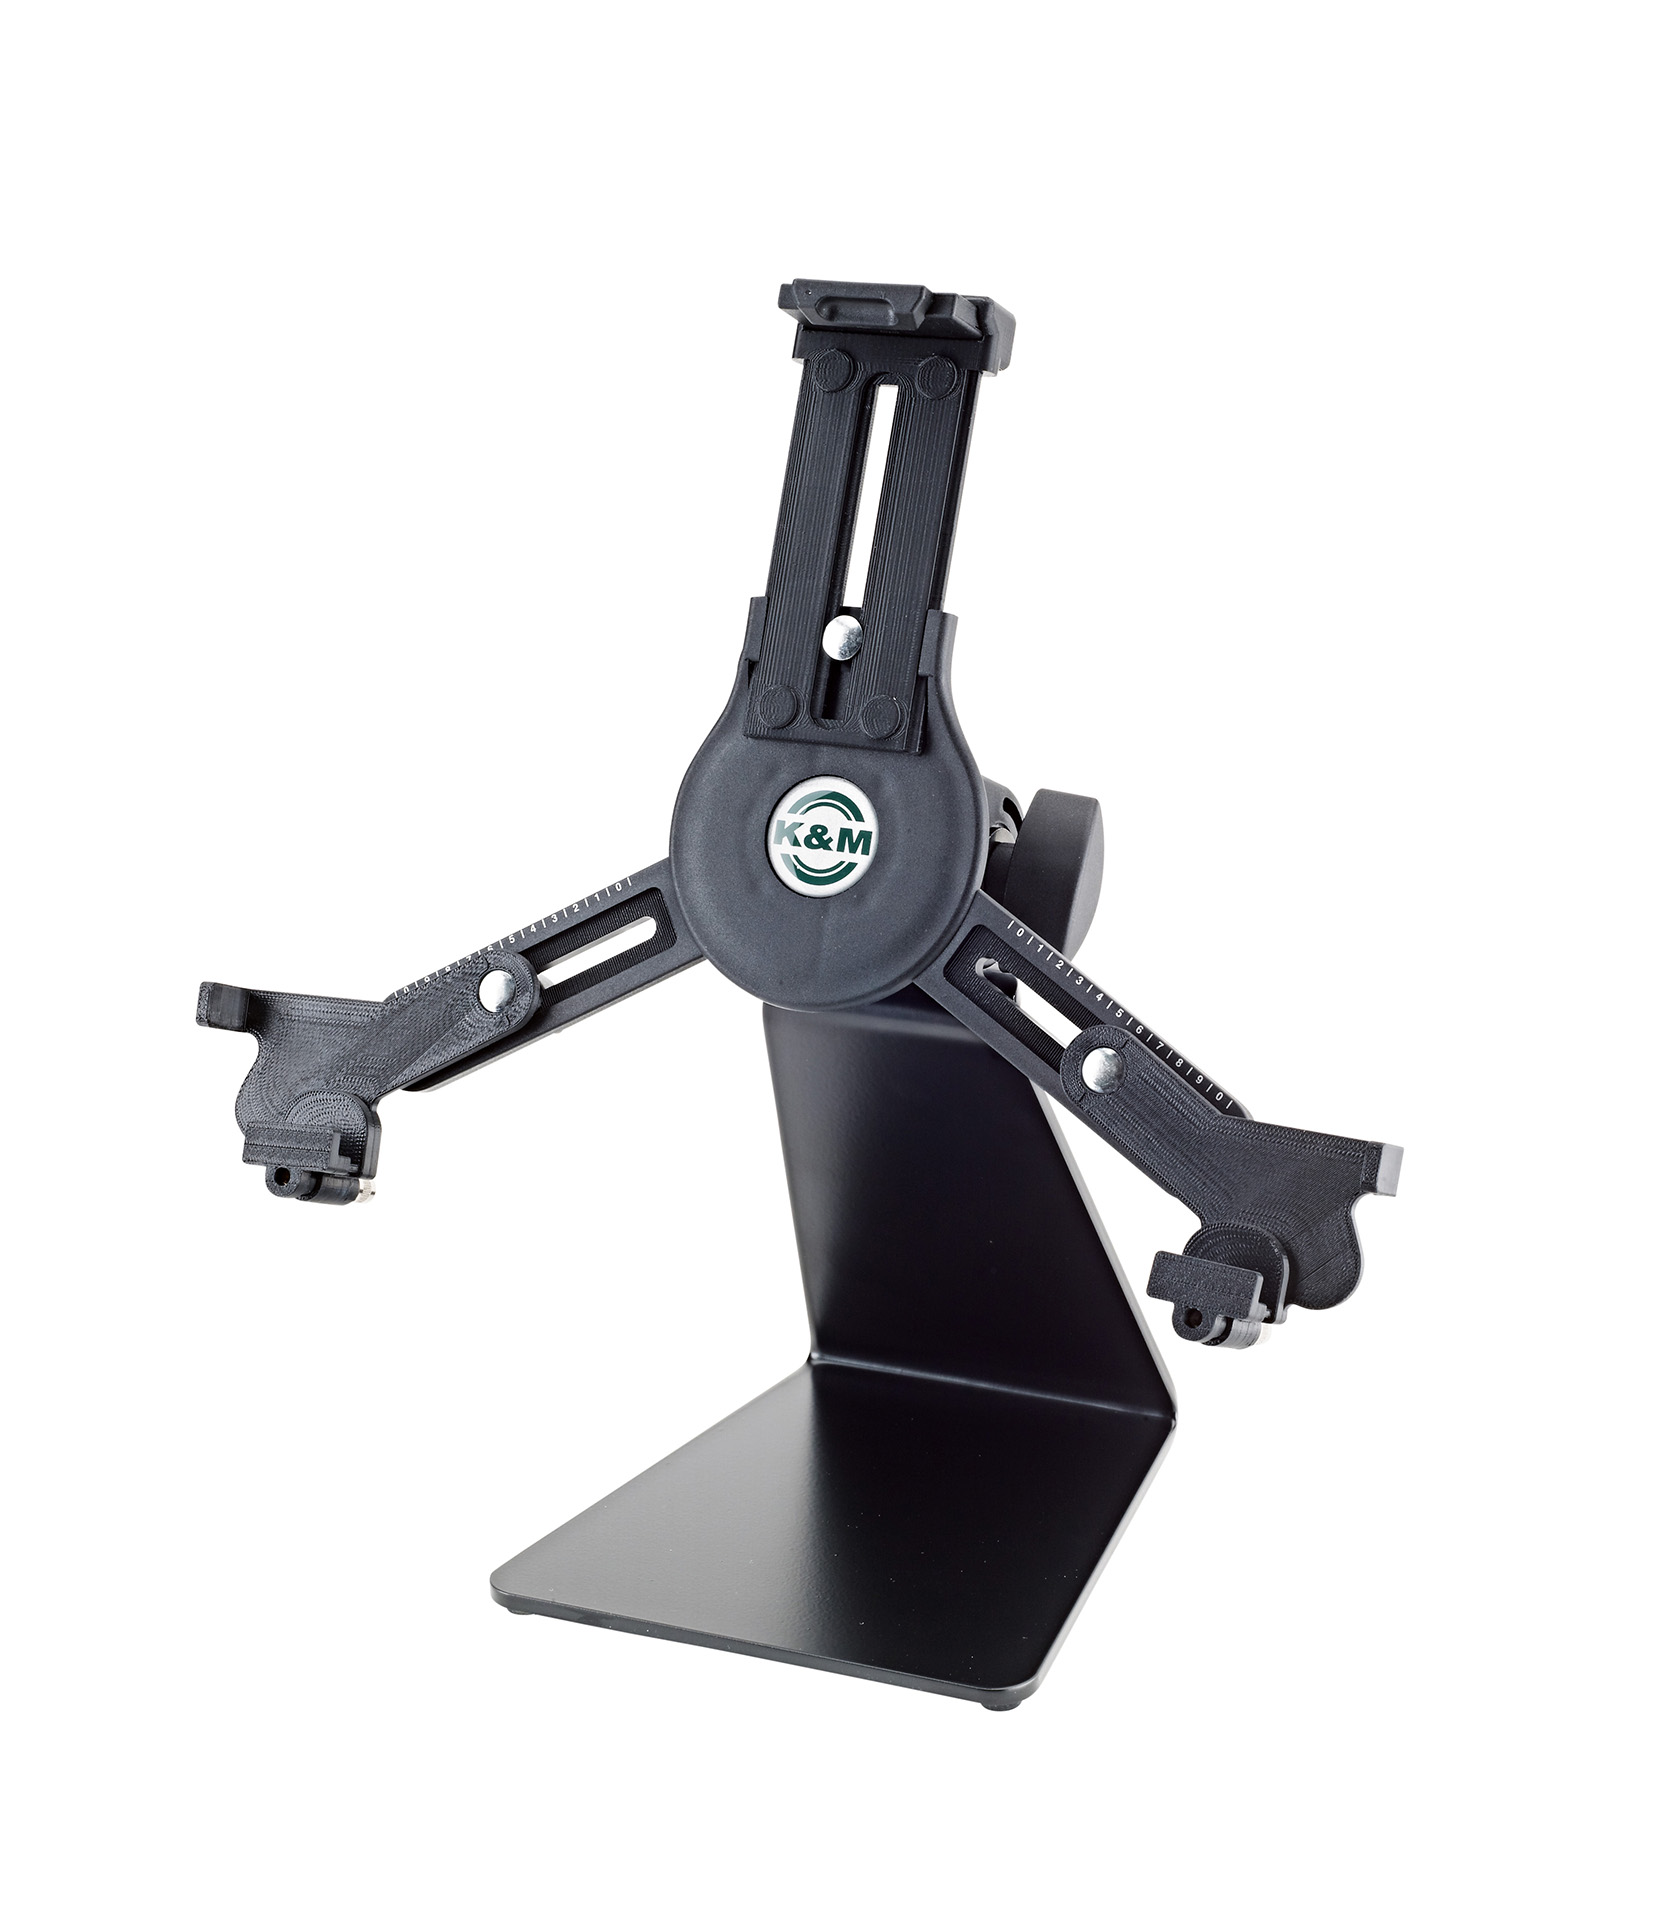 buy k&m 19792 000 55 table stand w universal tablet holder